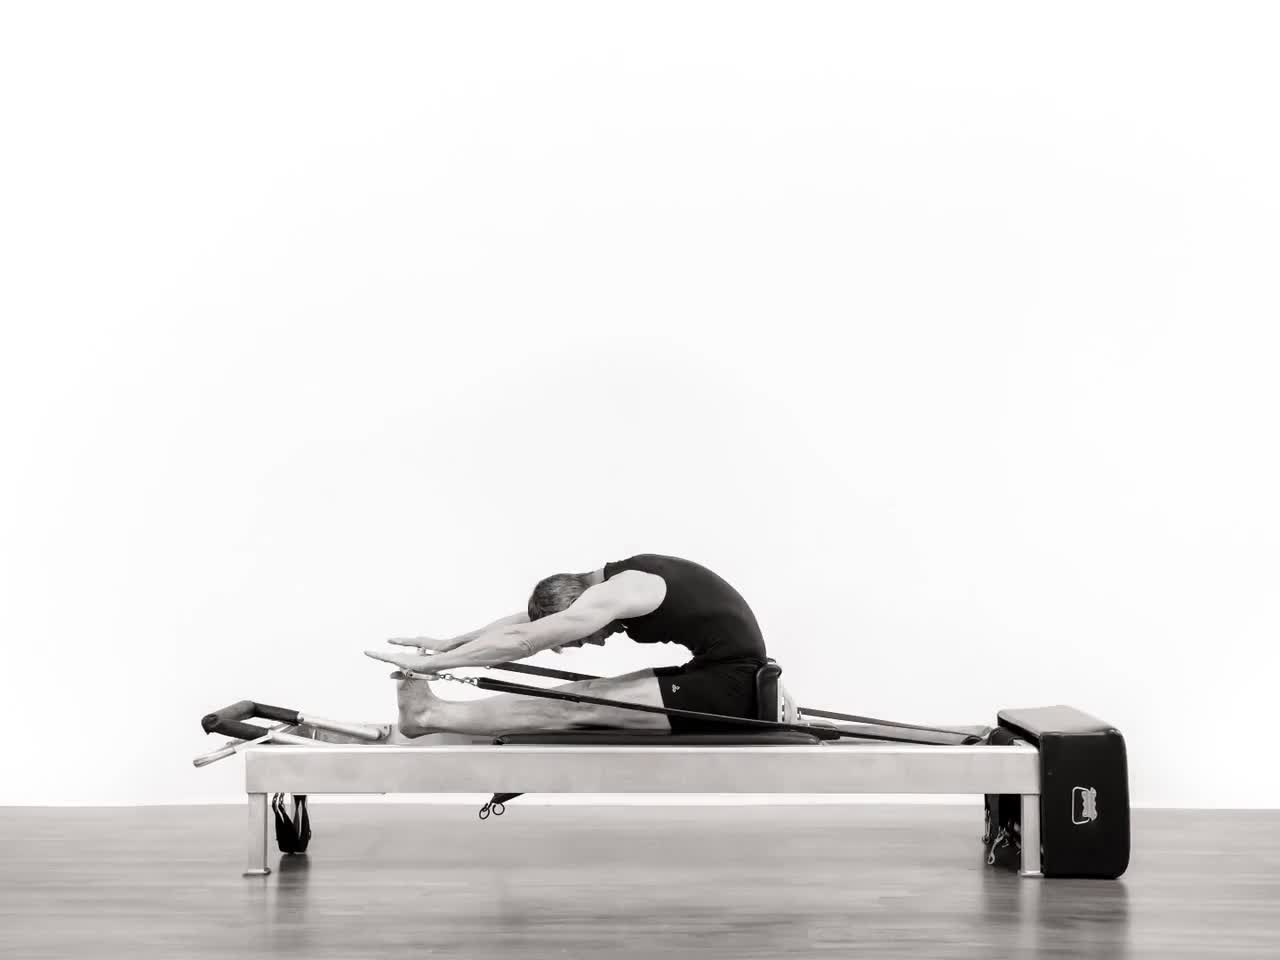 Classical Pilates Centre Reformer Advanced Exercises by Kirk James Smith A1  Matt Laminated Poster 59.4 X 84.1 Cm / 23.4 X 33.1 